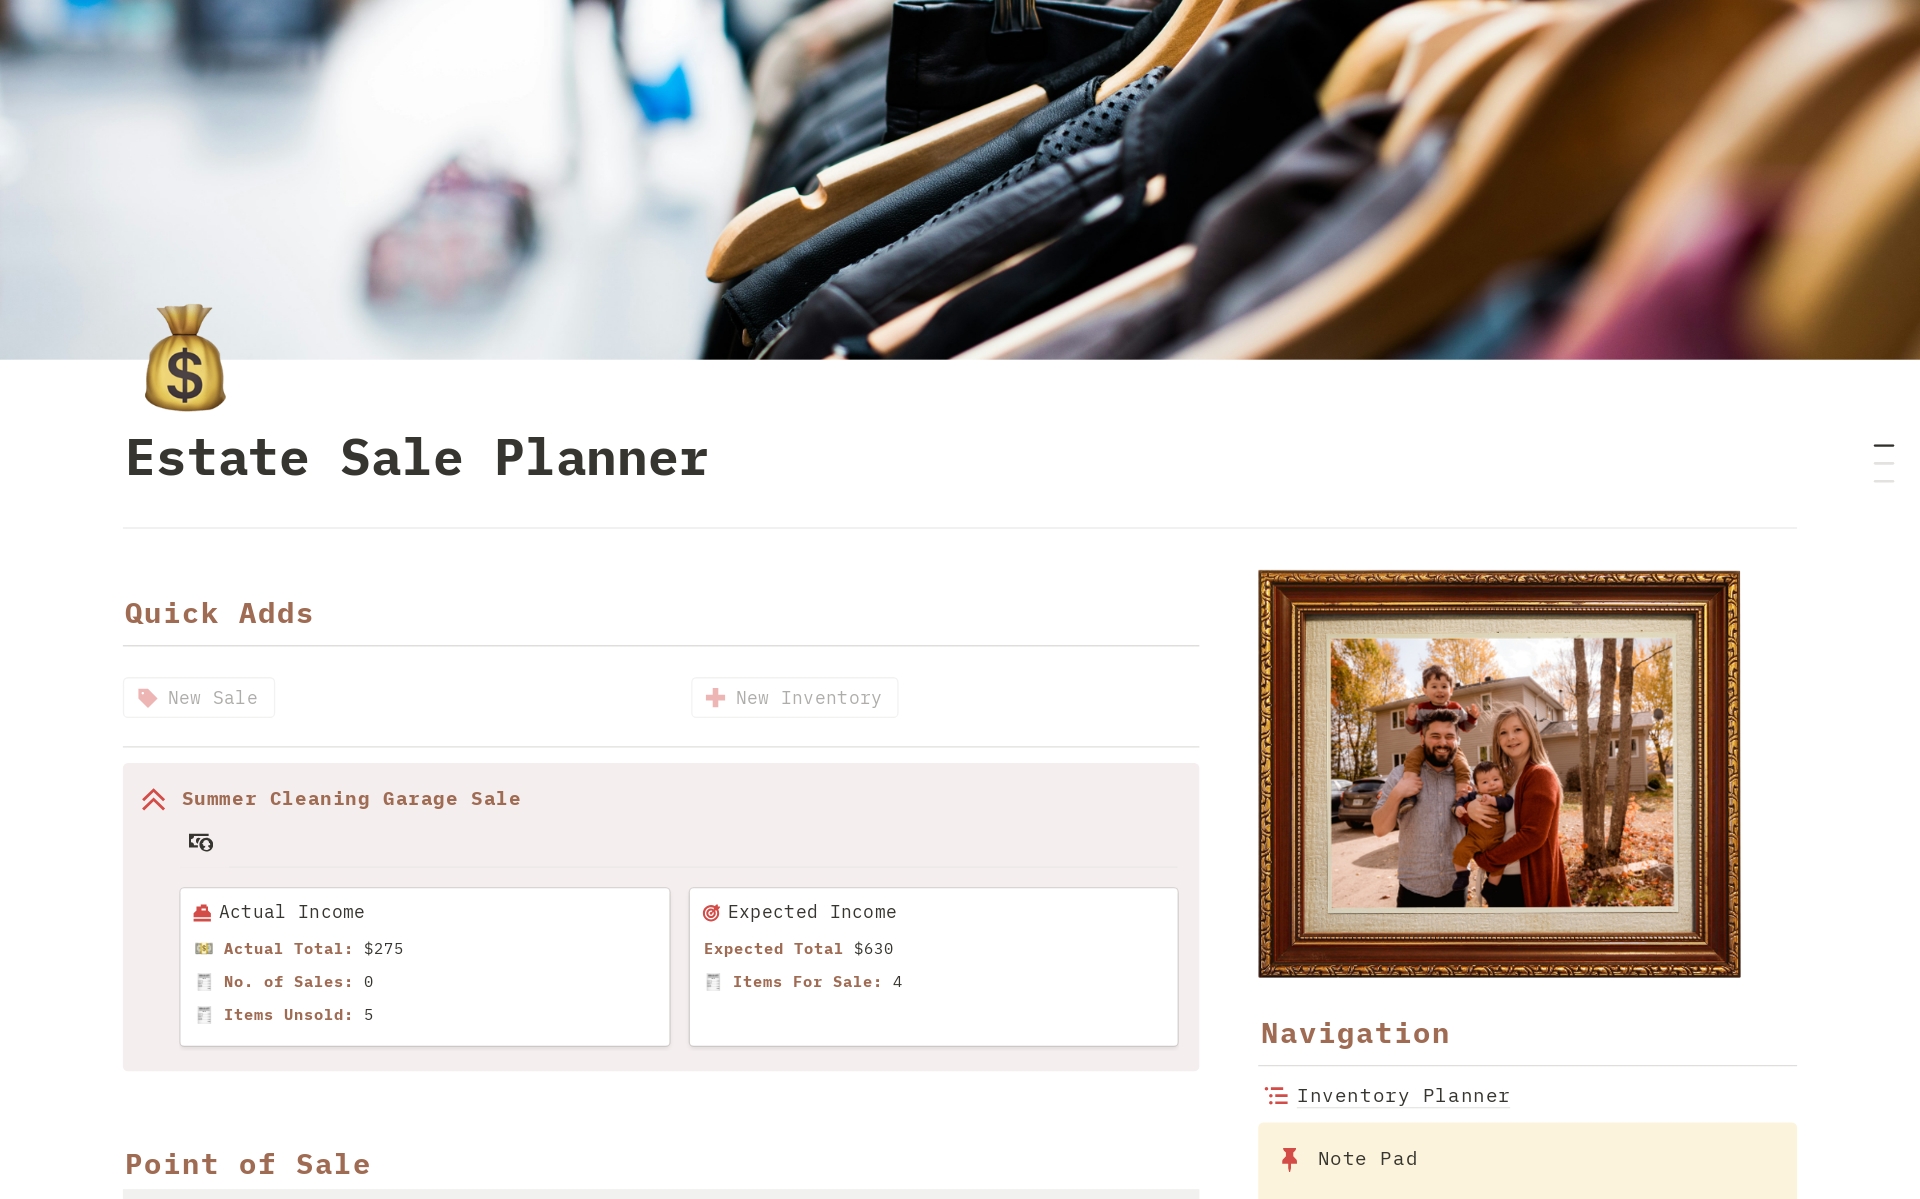 Introducing our estate sale Notion template, complete with an estate sale log inventory tracker, estate sale spreadsheet, estate sale transaction tracker, and estate sales tracker. This elegant and user-friendly toolkit simplifies organizing and managing your estate sale.